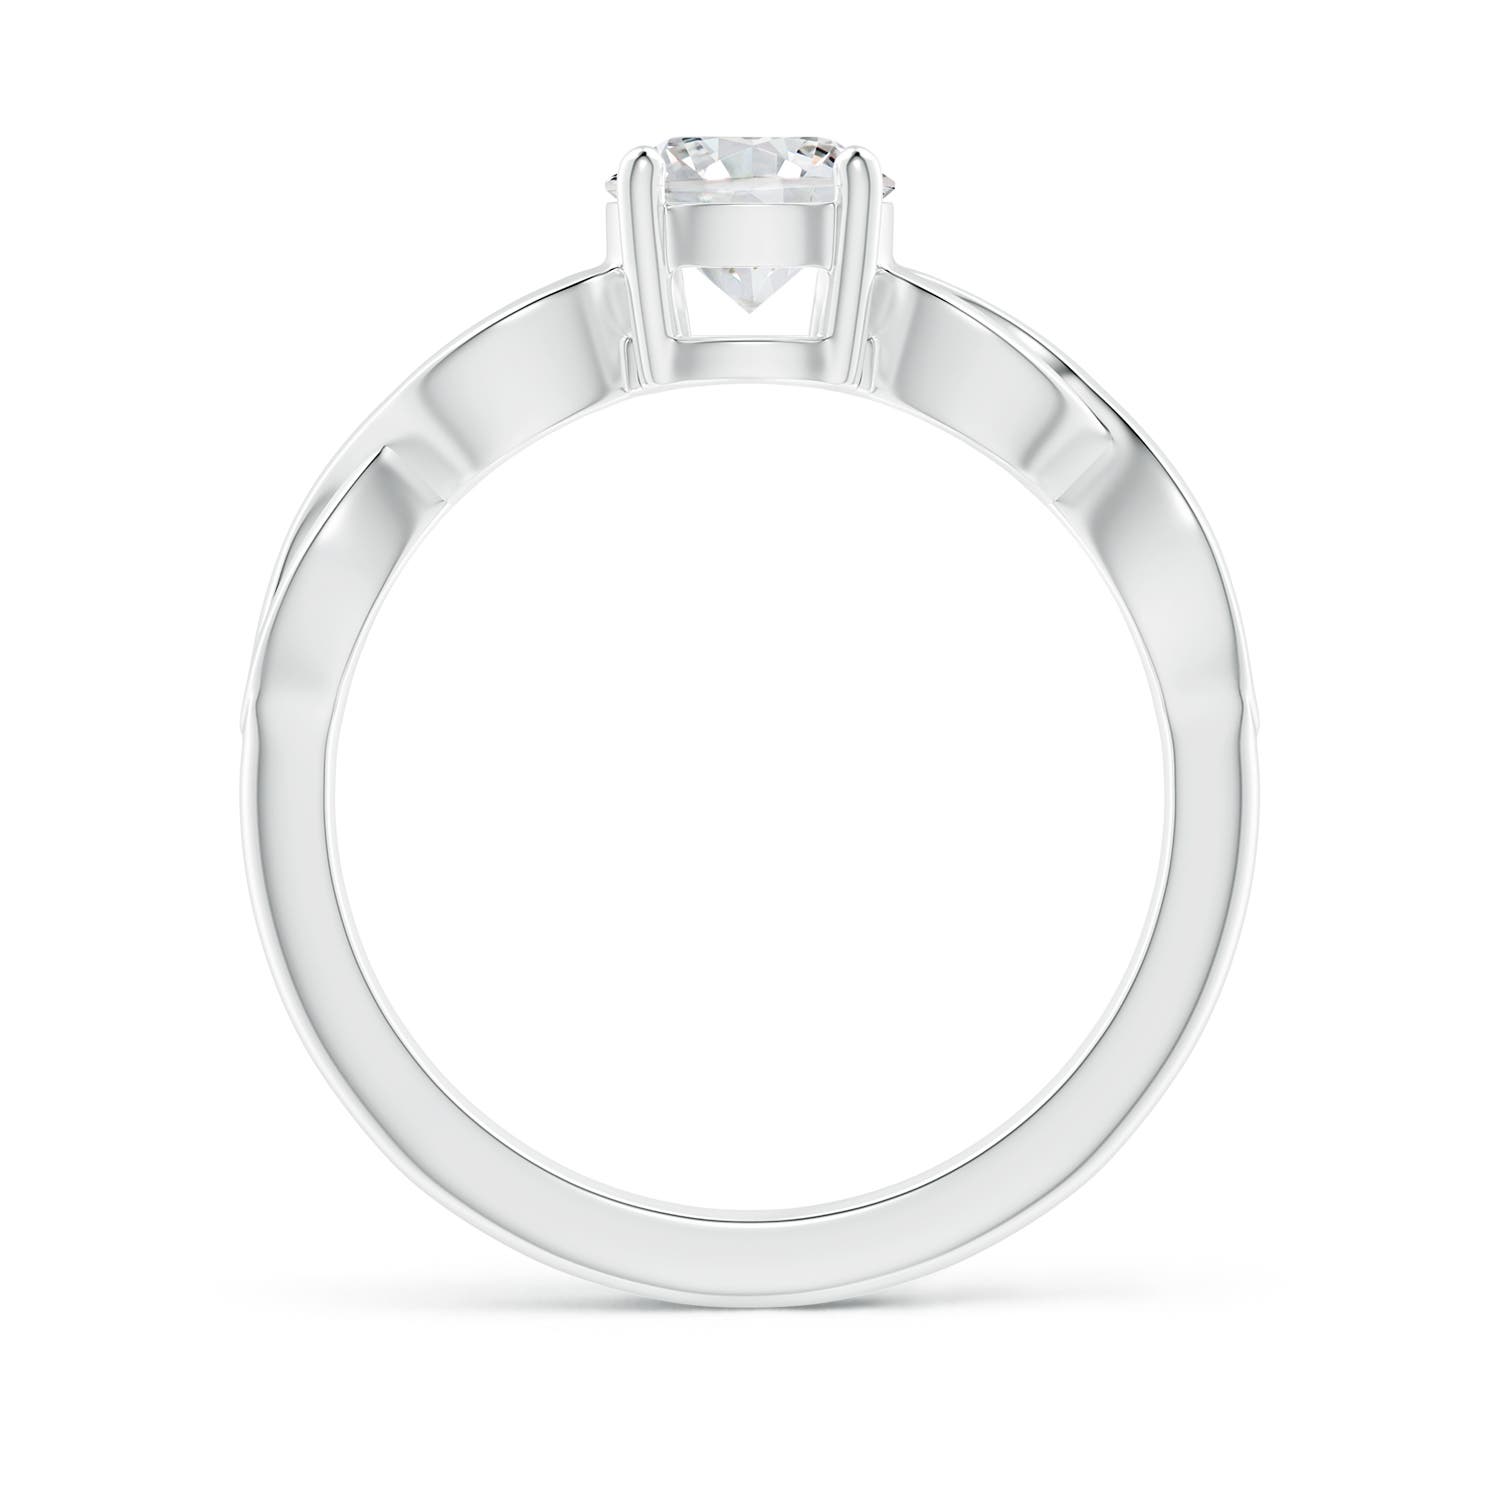 H, SI2 / 0.8 CT / 14 KT White Gold